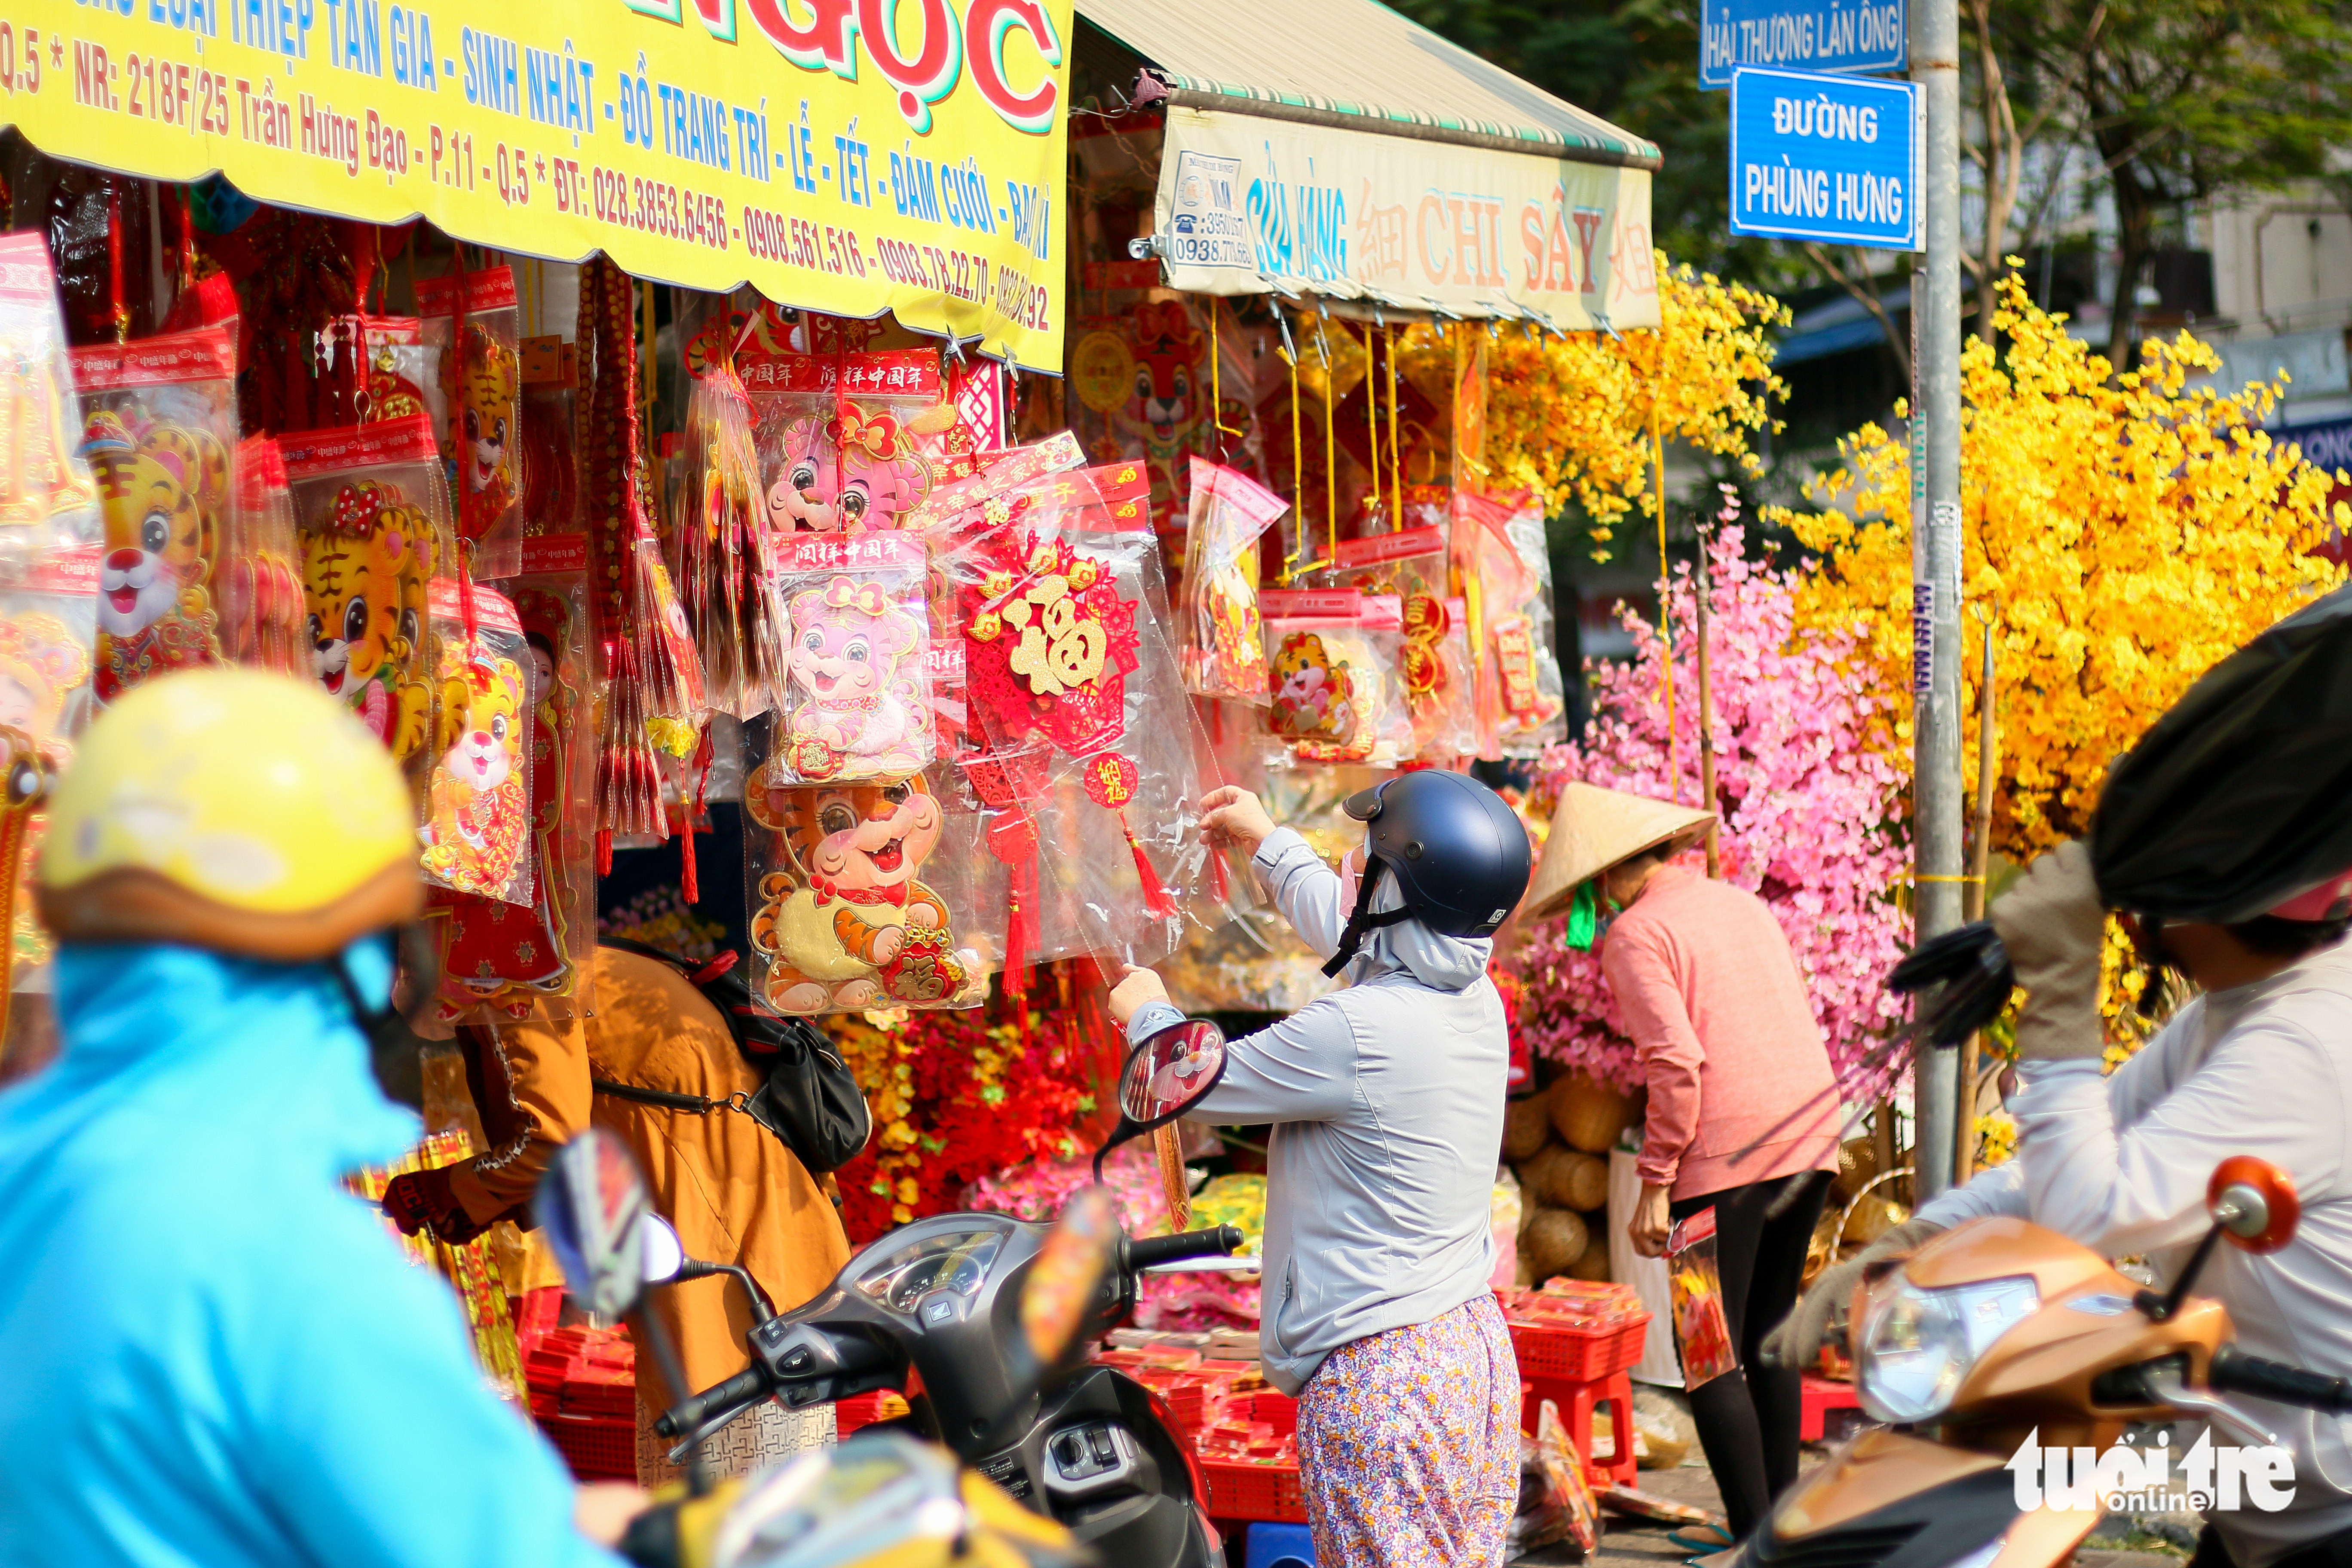 People shop for Lunar New Year decorations at 'Tai loc' Market on Hai Thuong Lan Ong Street in District 5, Ho Chi Minh City. Photo: Chau Tuan / Tuoi Tre